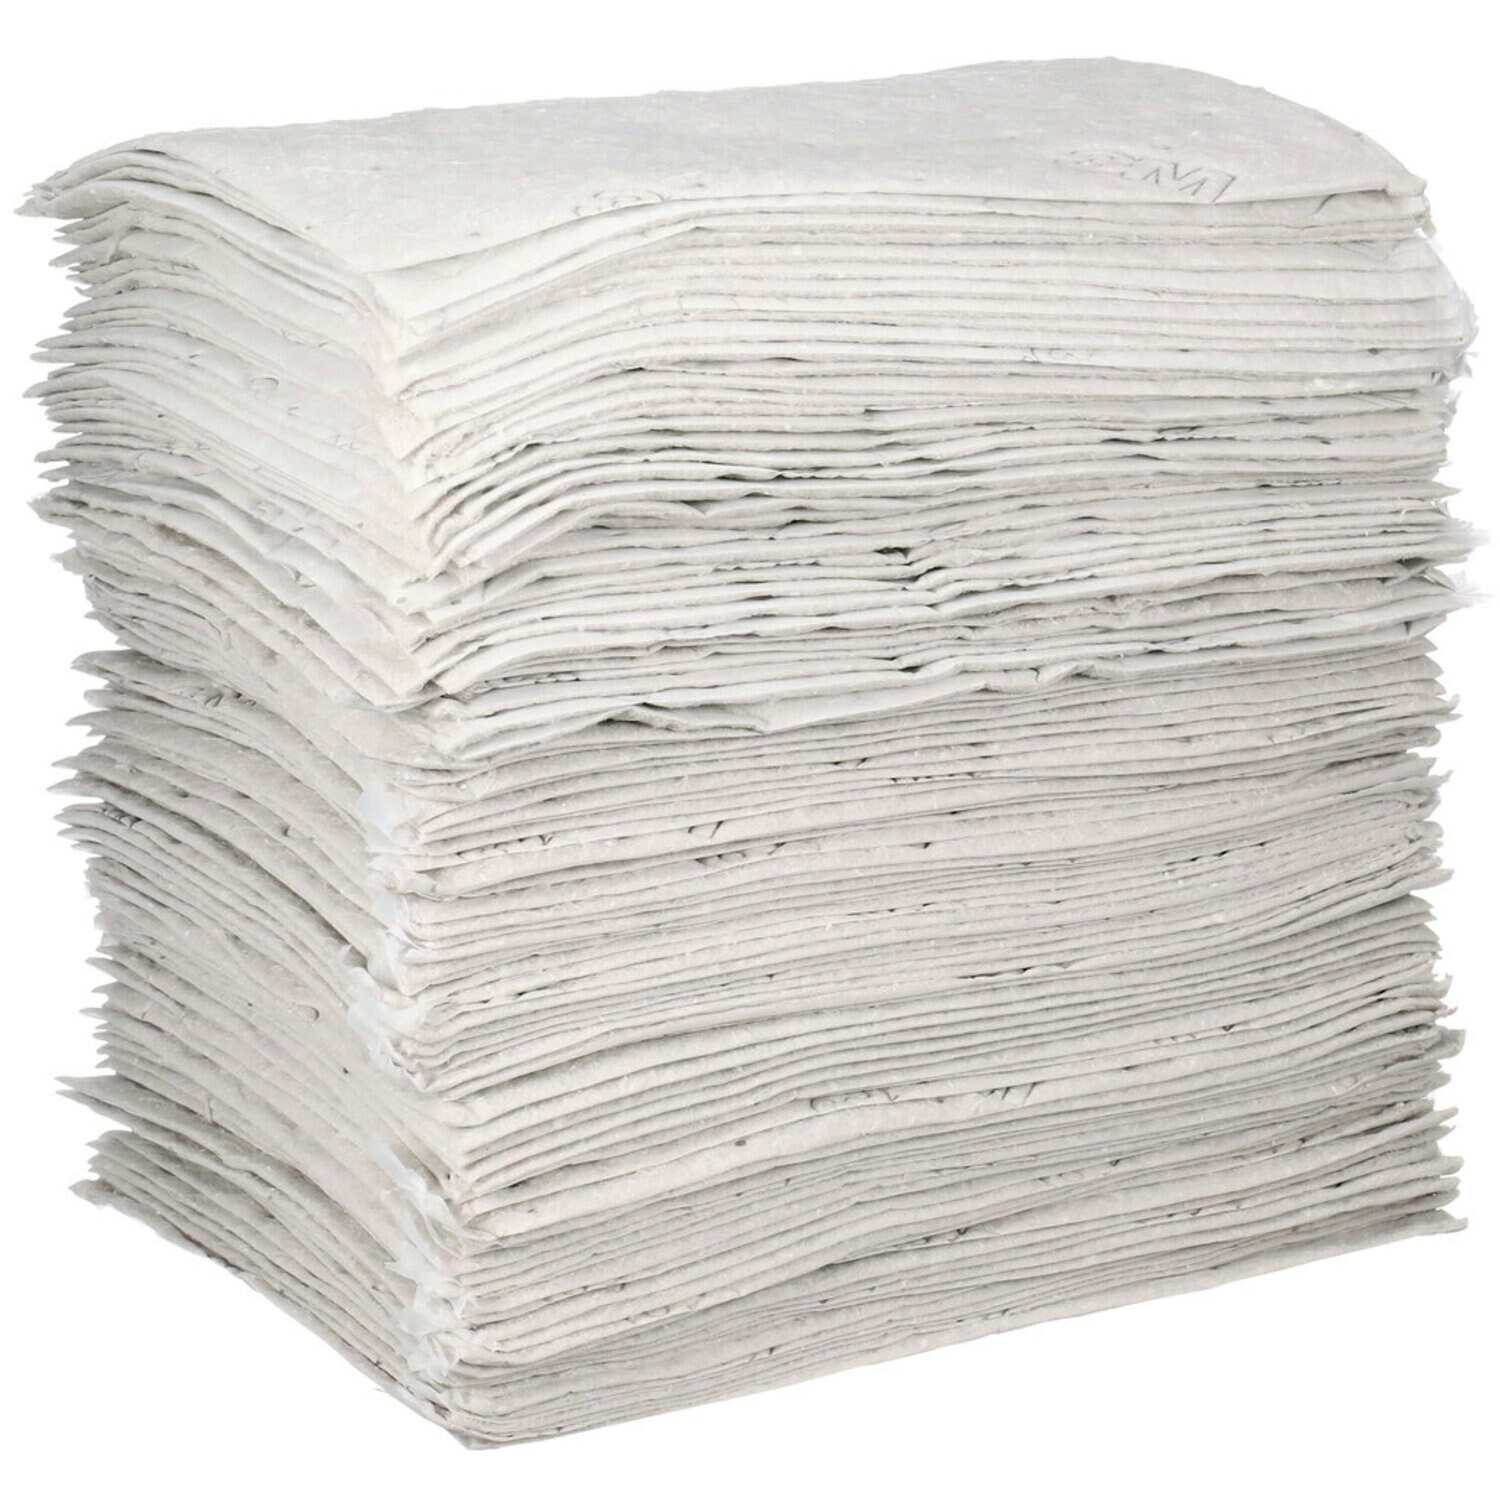 7100003876 - 3M Maintenance Sorbent Pad M-PD1520DD/M-A2002/07164 (AAD), High
Capacity, 15 in x 20 in, 100 Each/Case